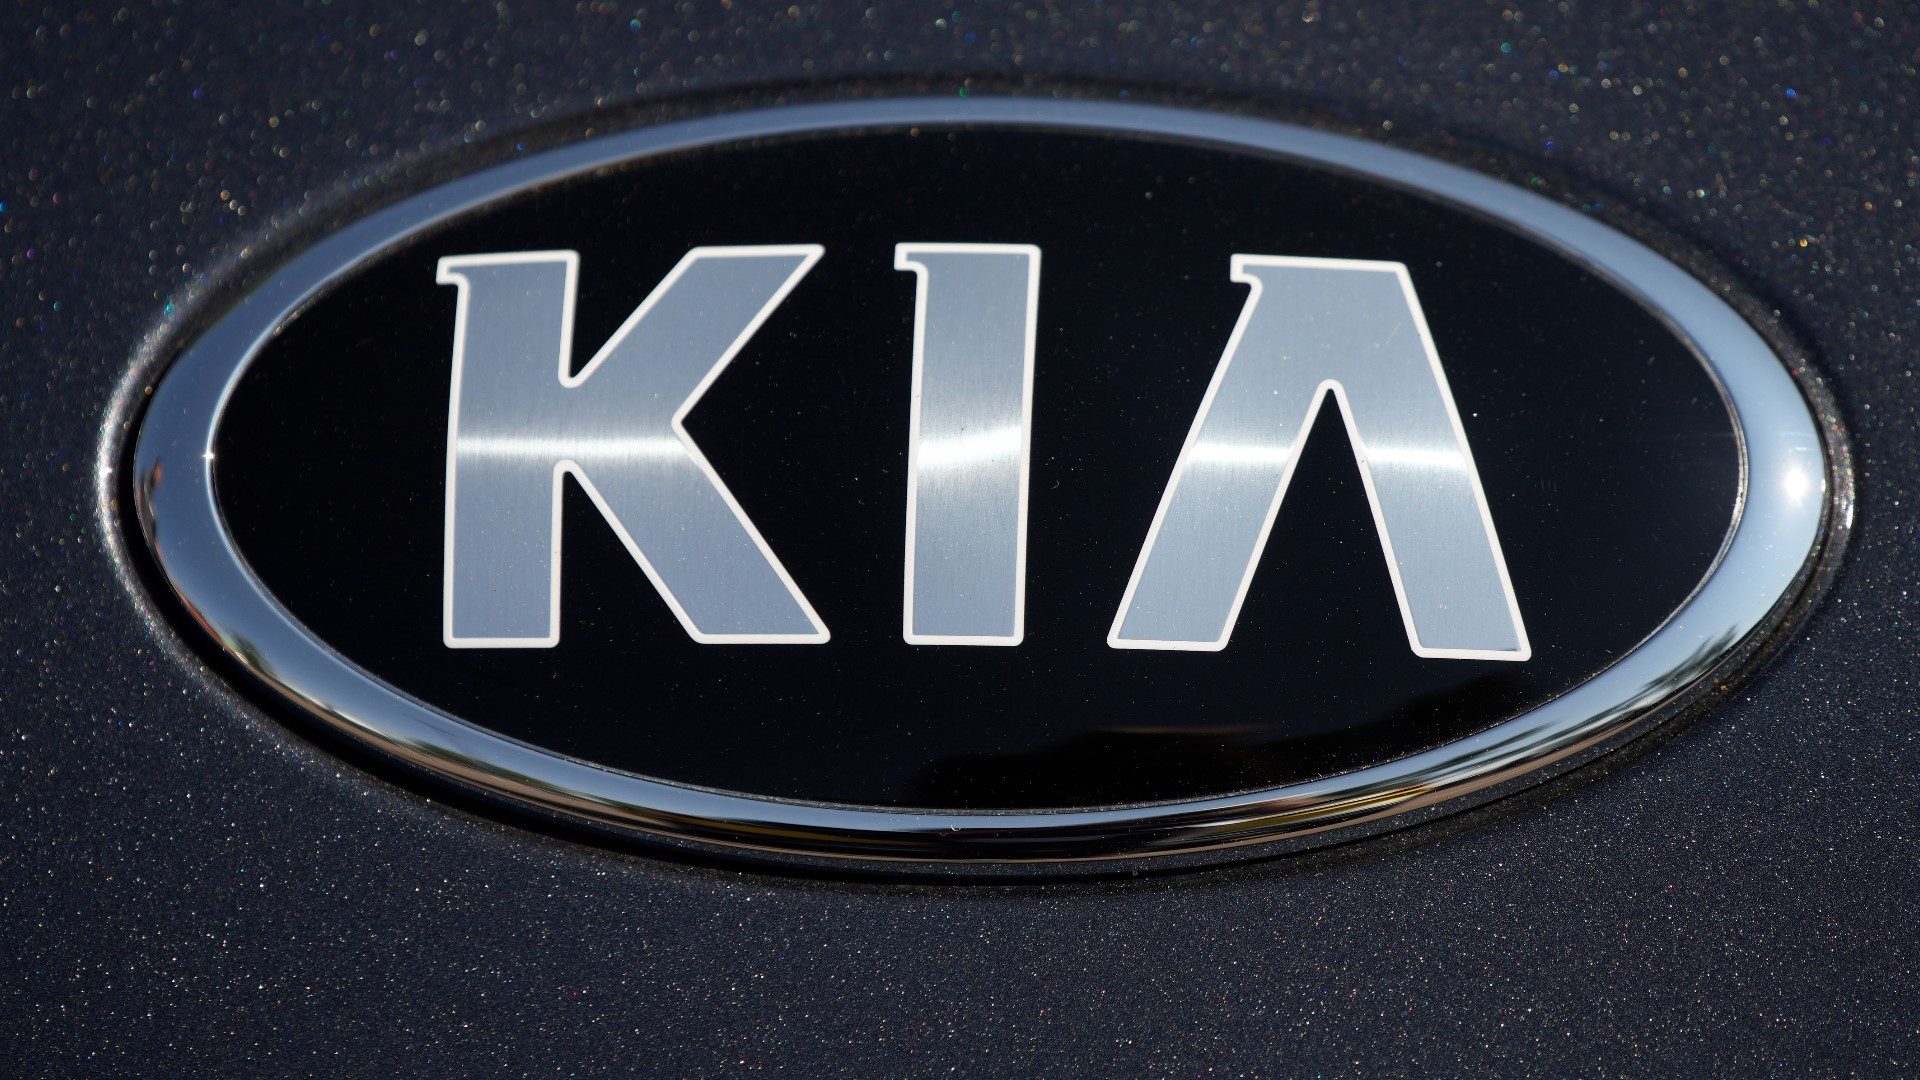 Owners are strongly urged to park the recalled Kia vehicles outside and away from structures until they are repaired.